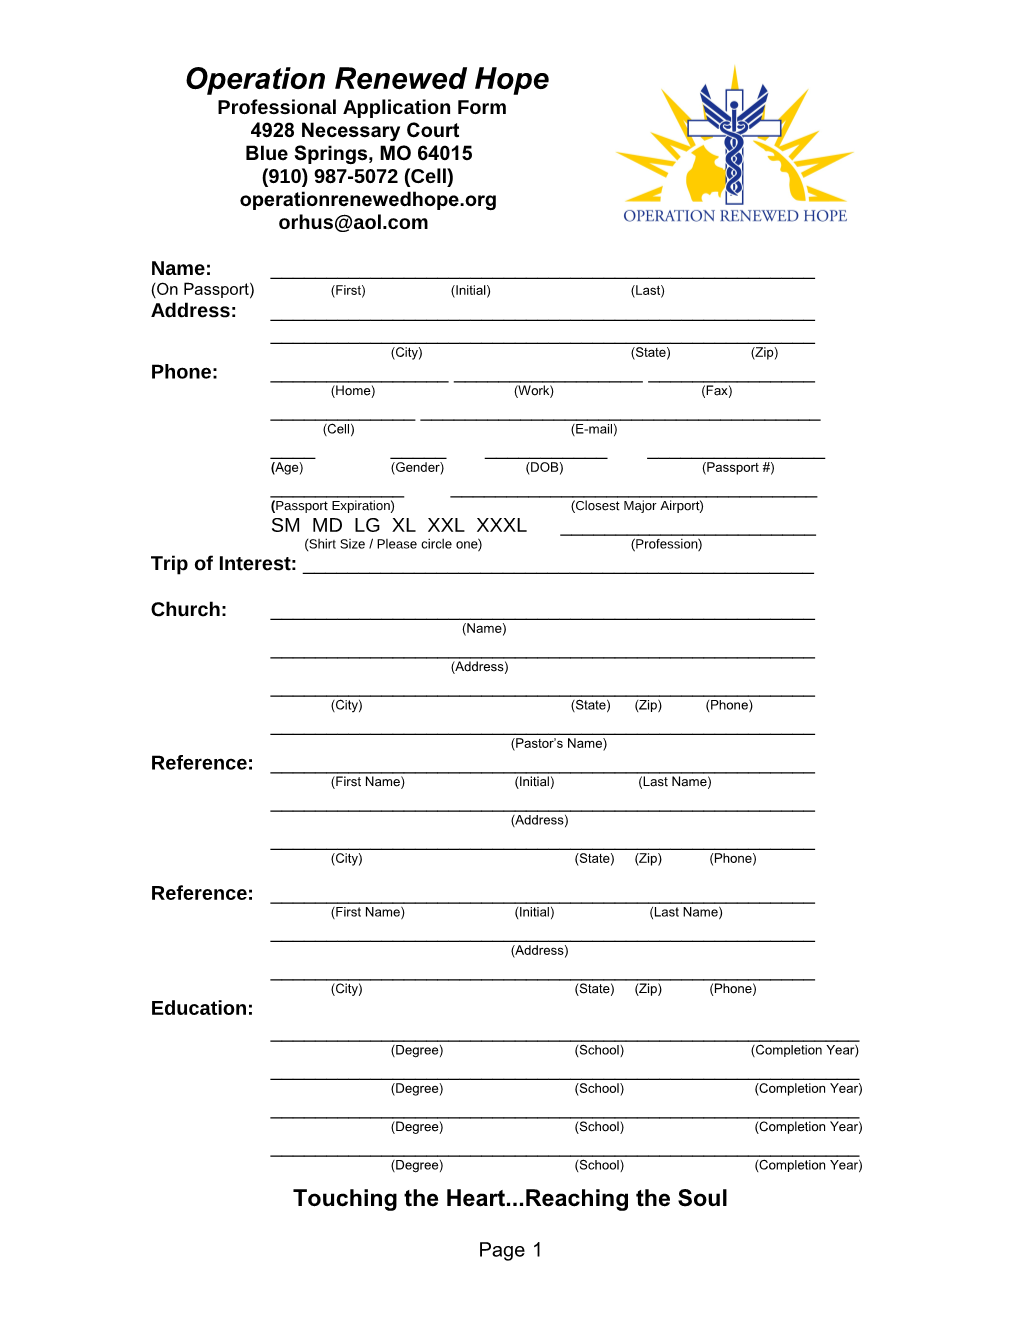 Professional Application Form 4928 Necessary Court Blue Springs, MO 64015